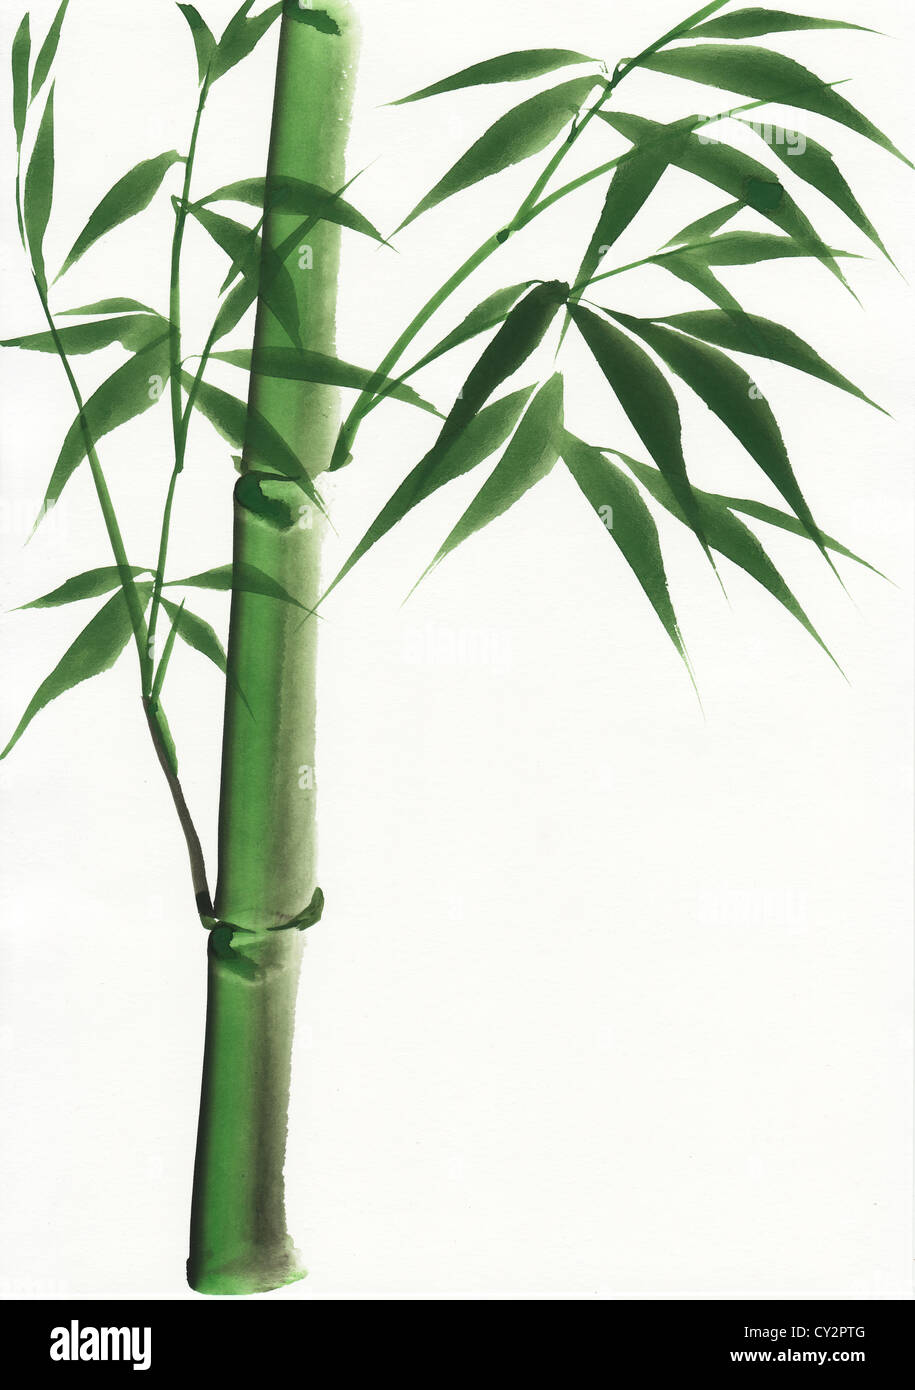 Bamboo in Japanese style. Watercolor hand painting illustration